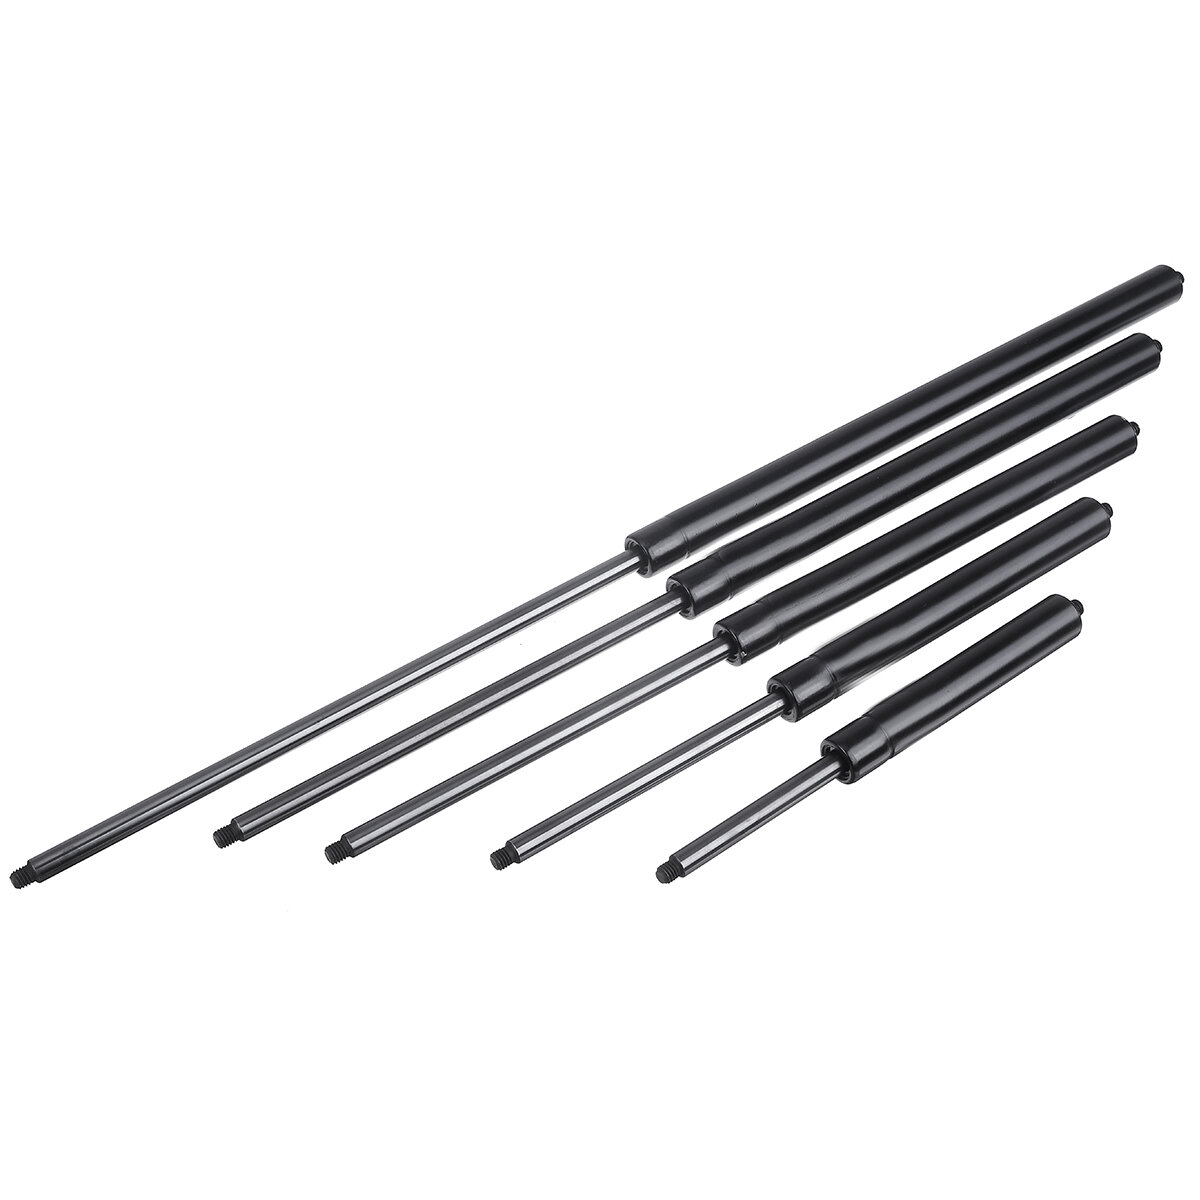 150N 210/310/410/510/610mm Universal Gas Spring Lift Supports Struts Rod For Car RV Caravans